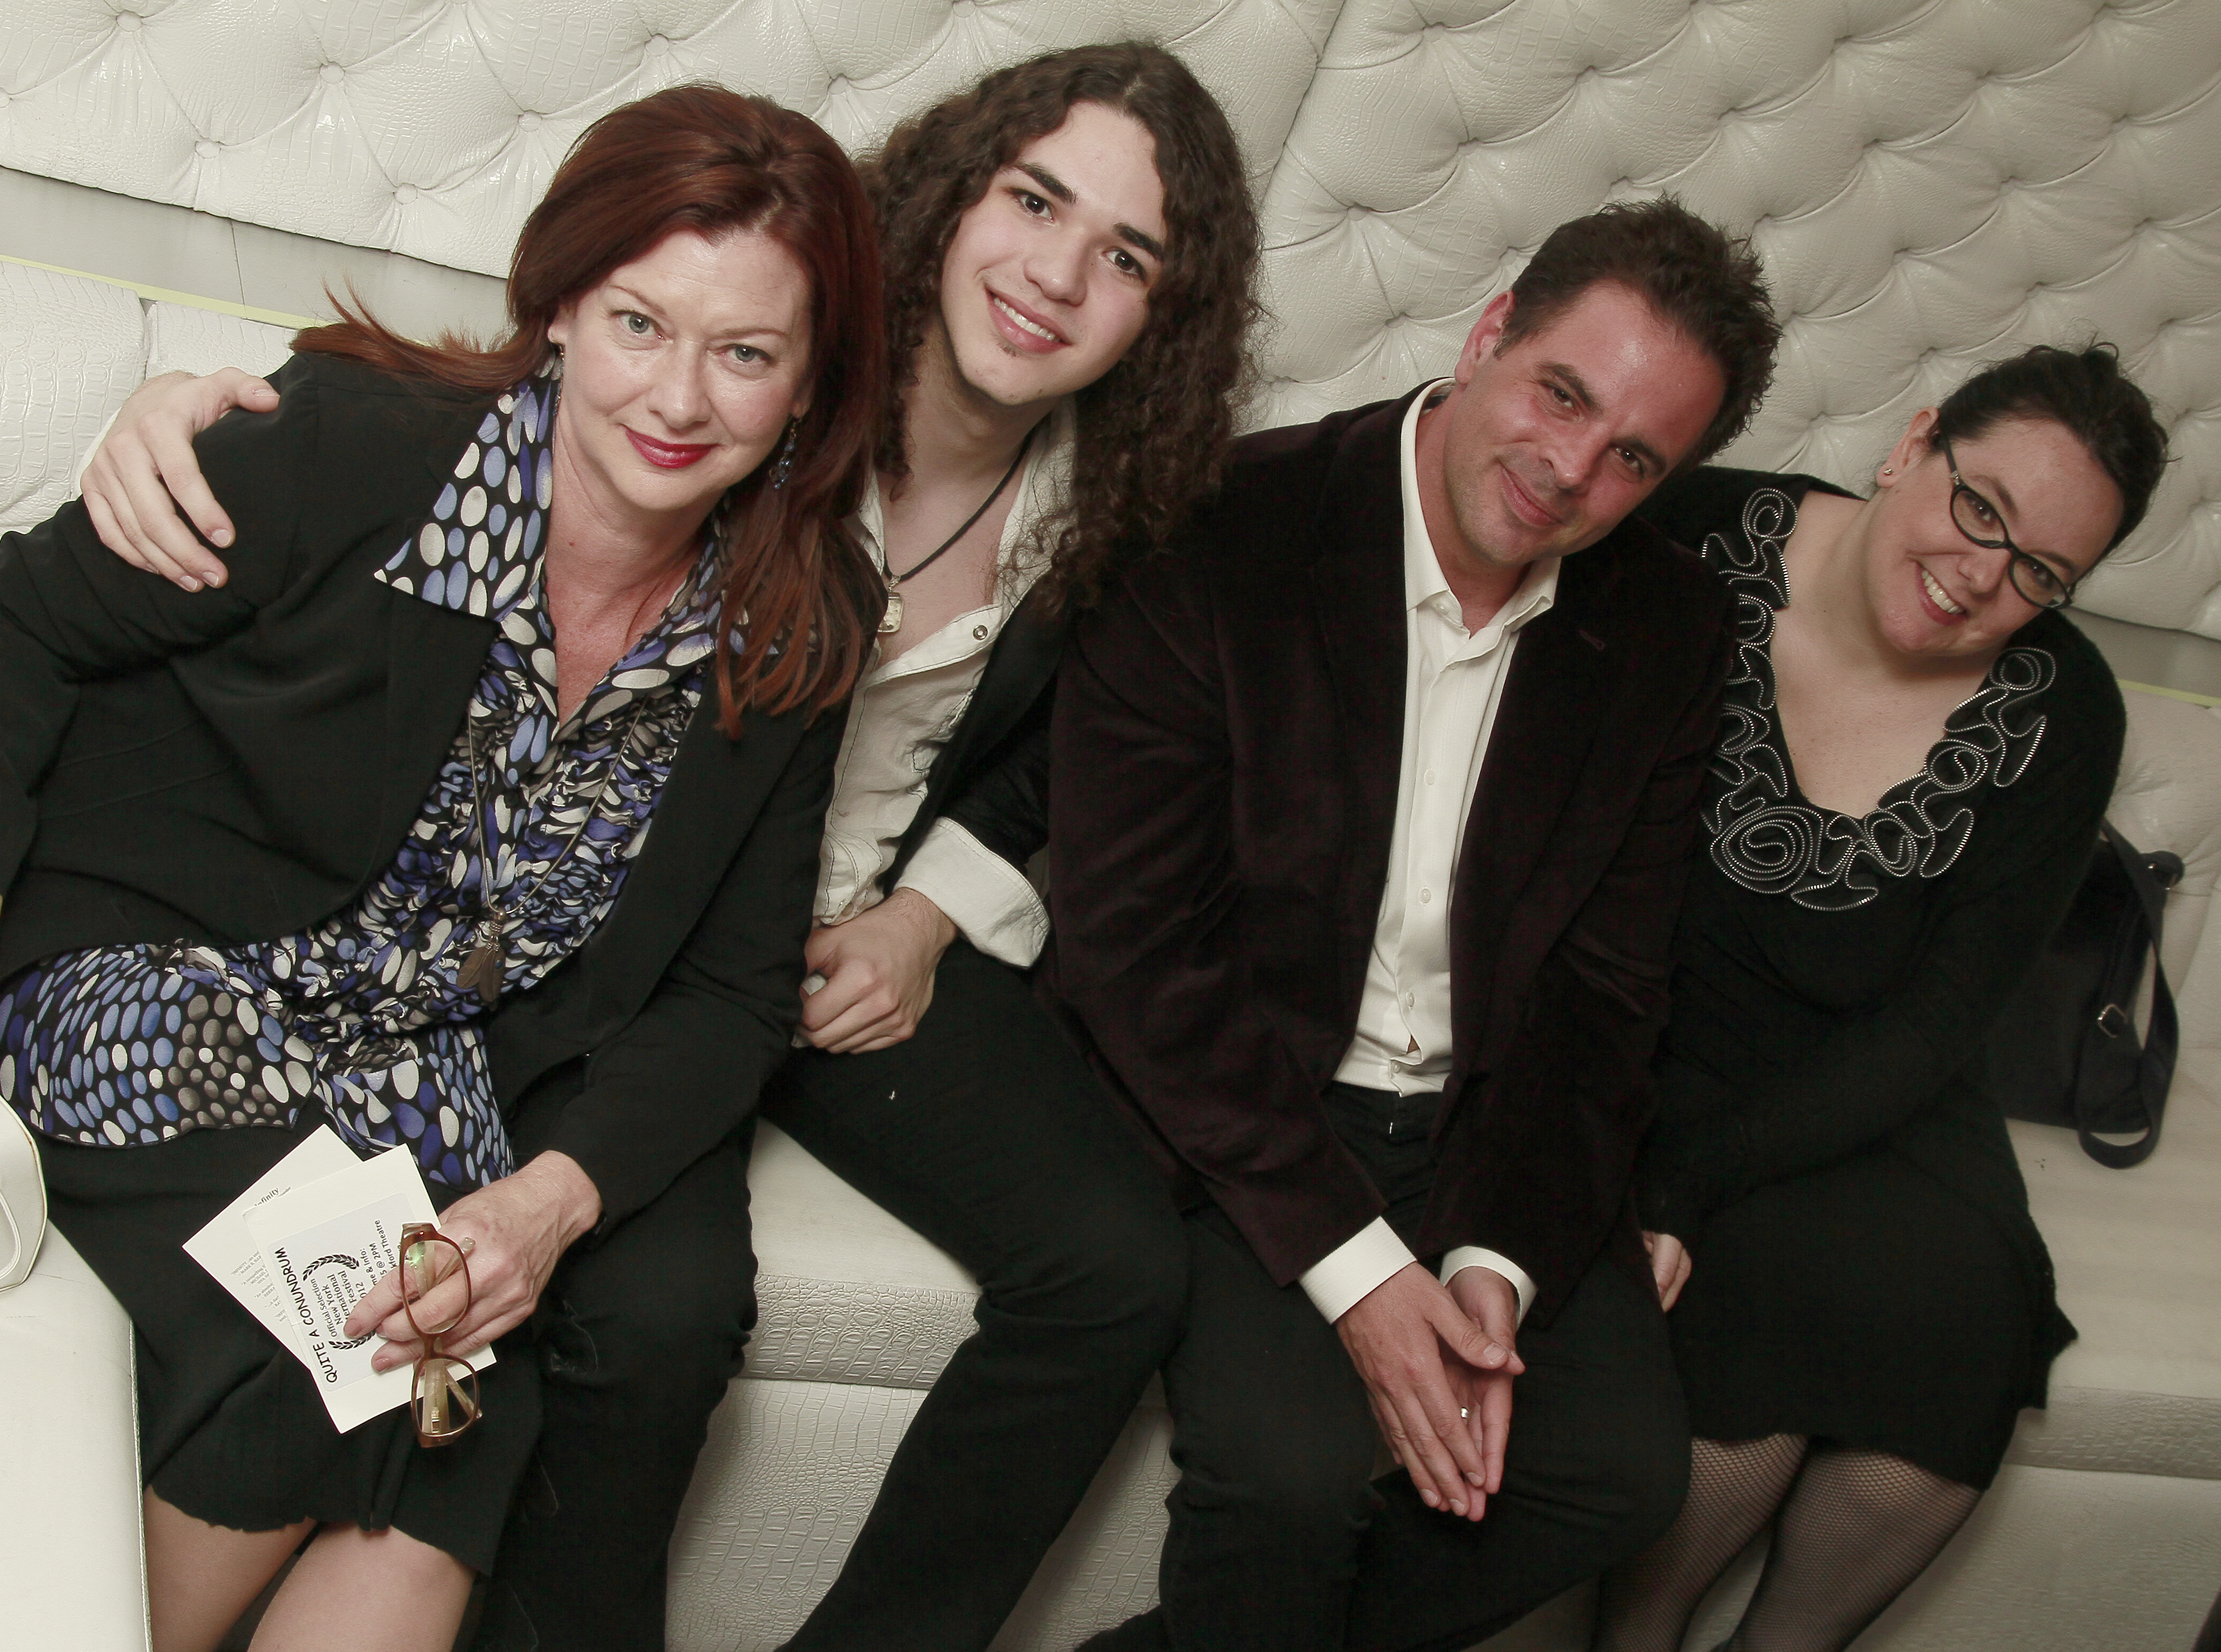 (from left to right) Stephanie Jones, Ronnie Connell,Alex Bram, and Renee Pezzotta